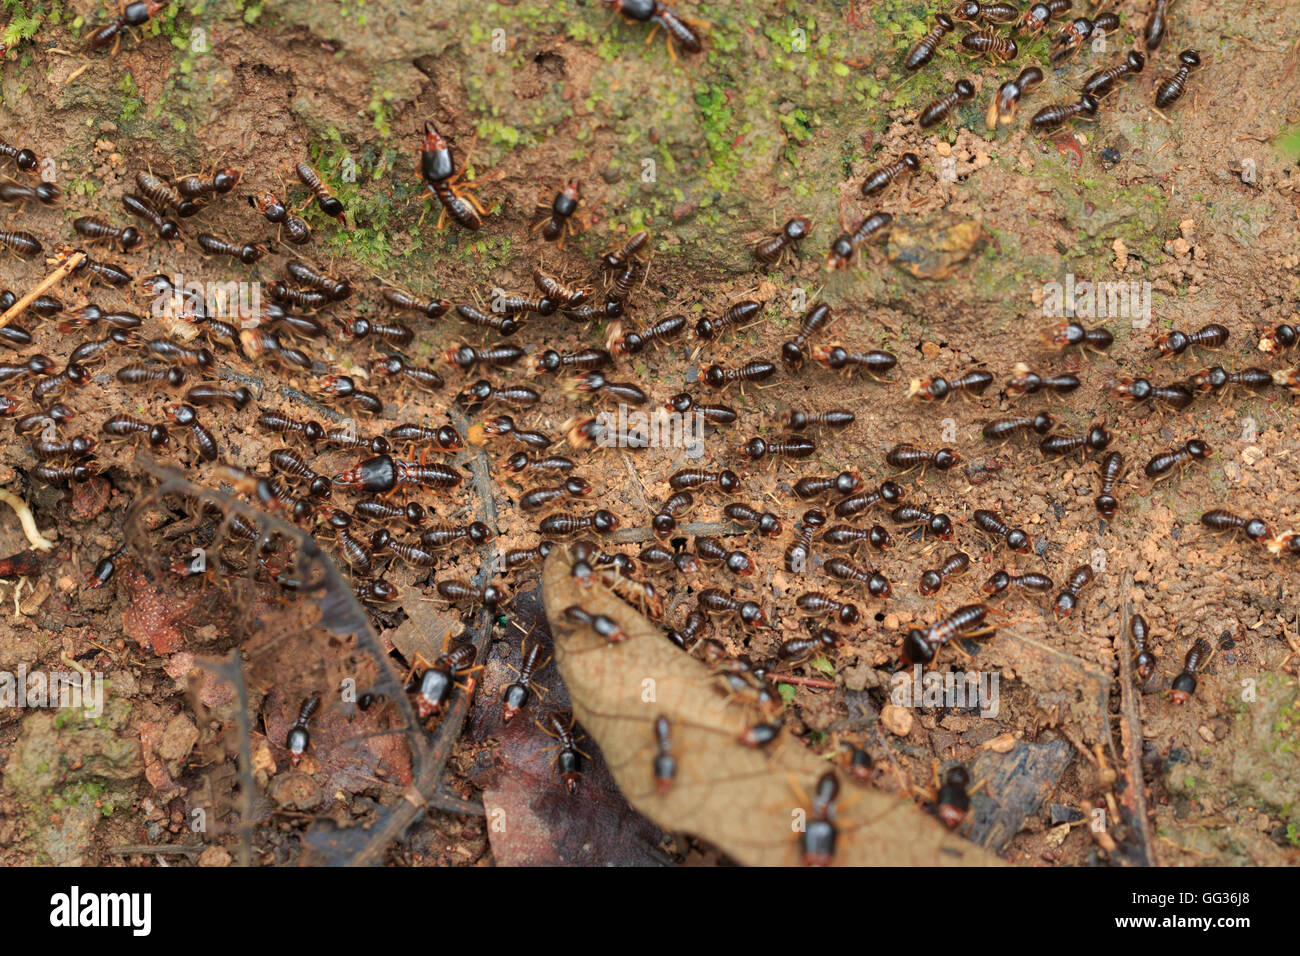 Motion of worker termites on the forest floor in Saraburi thailand. Shallow DOF Stock Photo